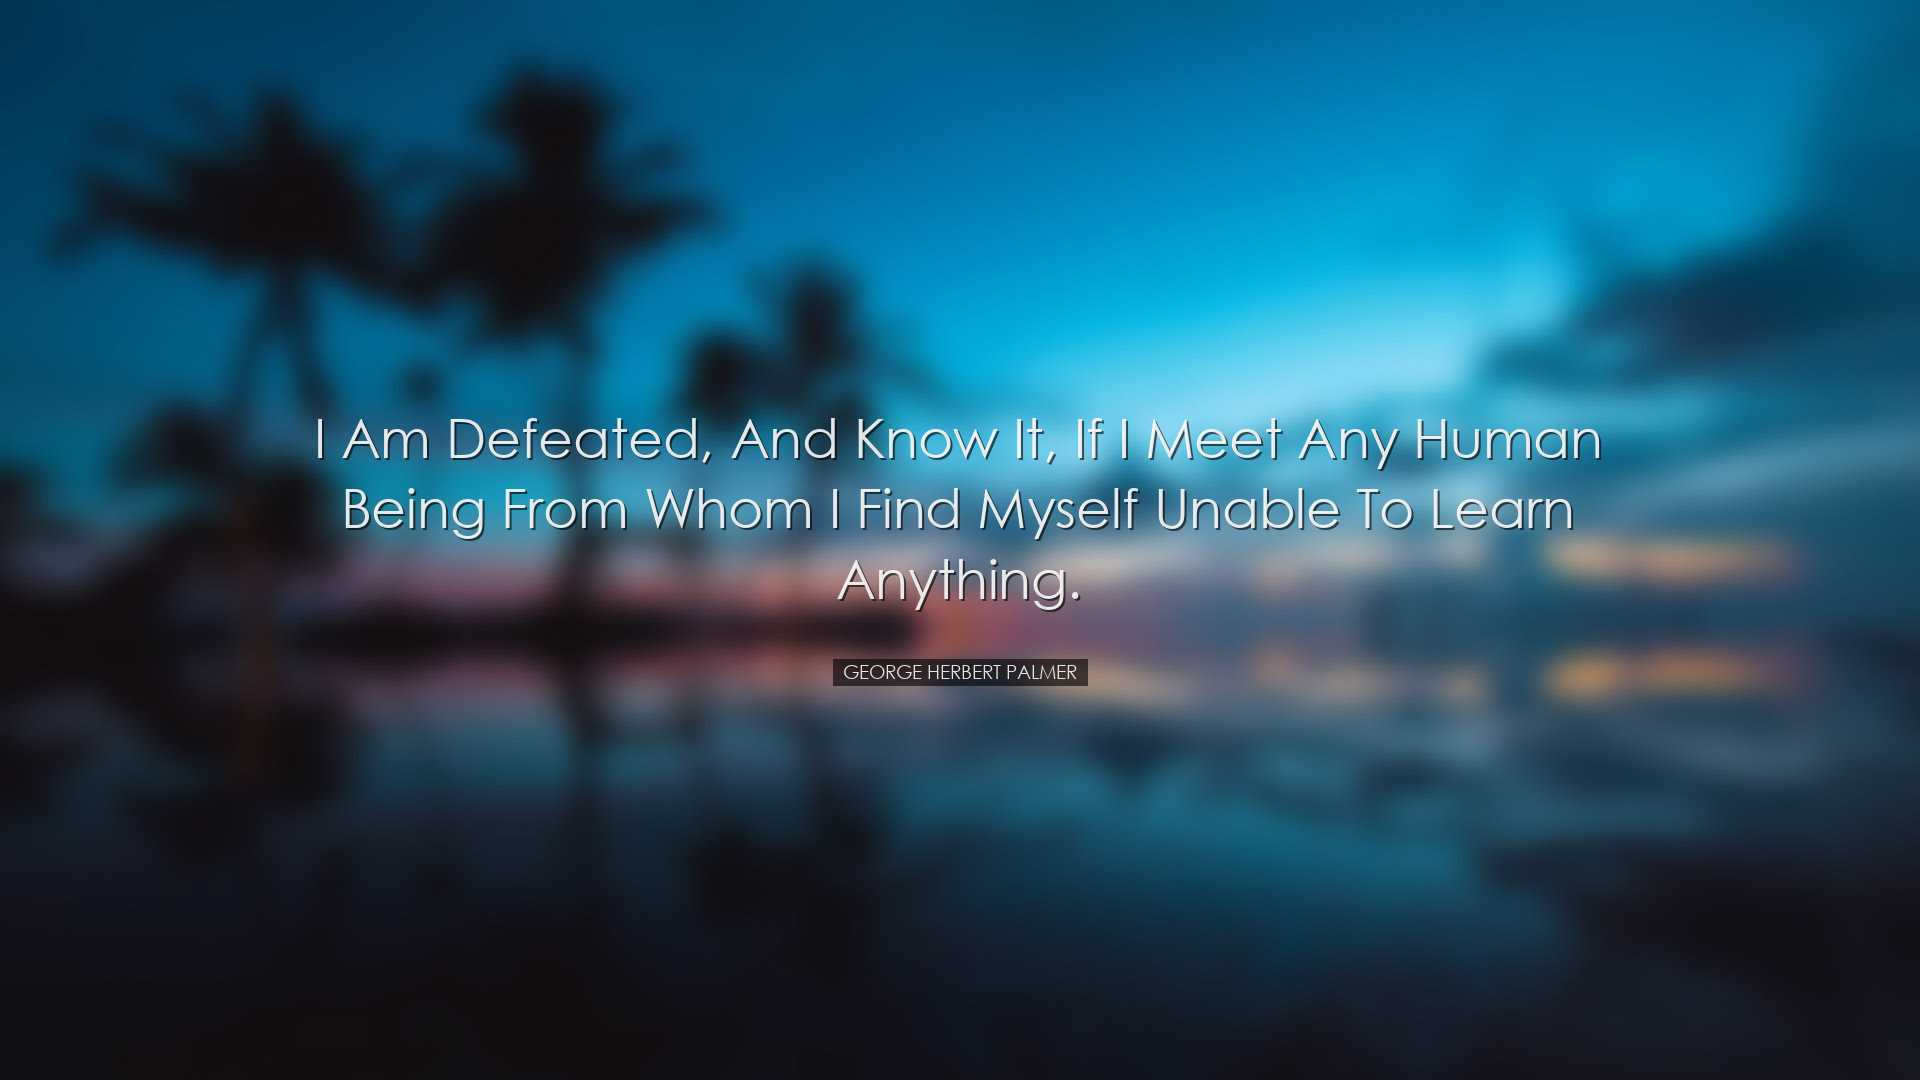 I am defeated, and know it, if I meet any human being from whom I